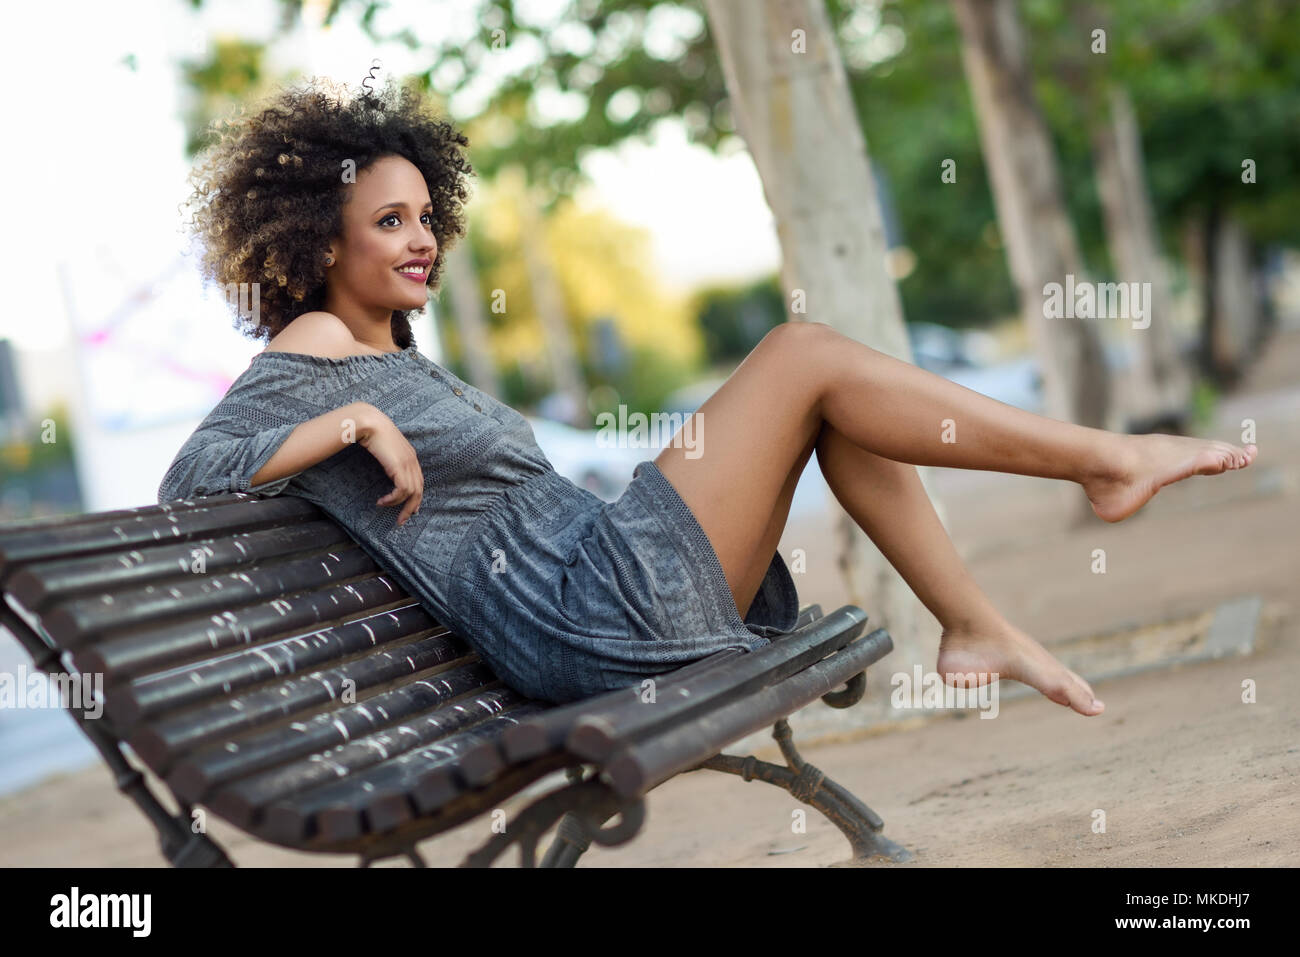 Young black woman with afro hairstyle sitting on a bench in urban background moving her legs. Mixed girl wearing casual clothes. Stock Photo